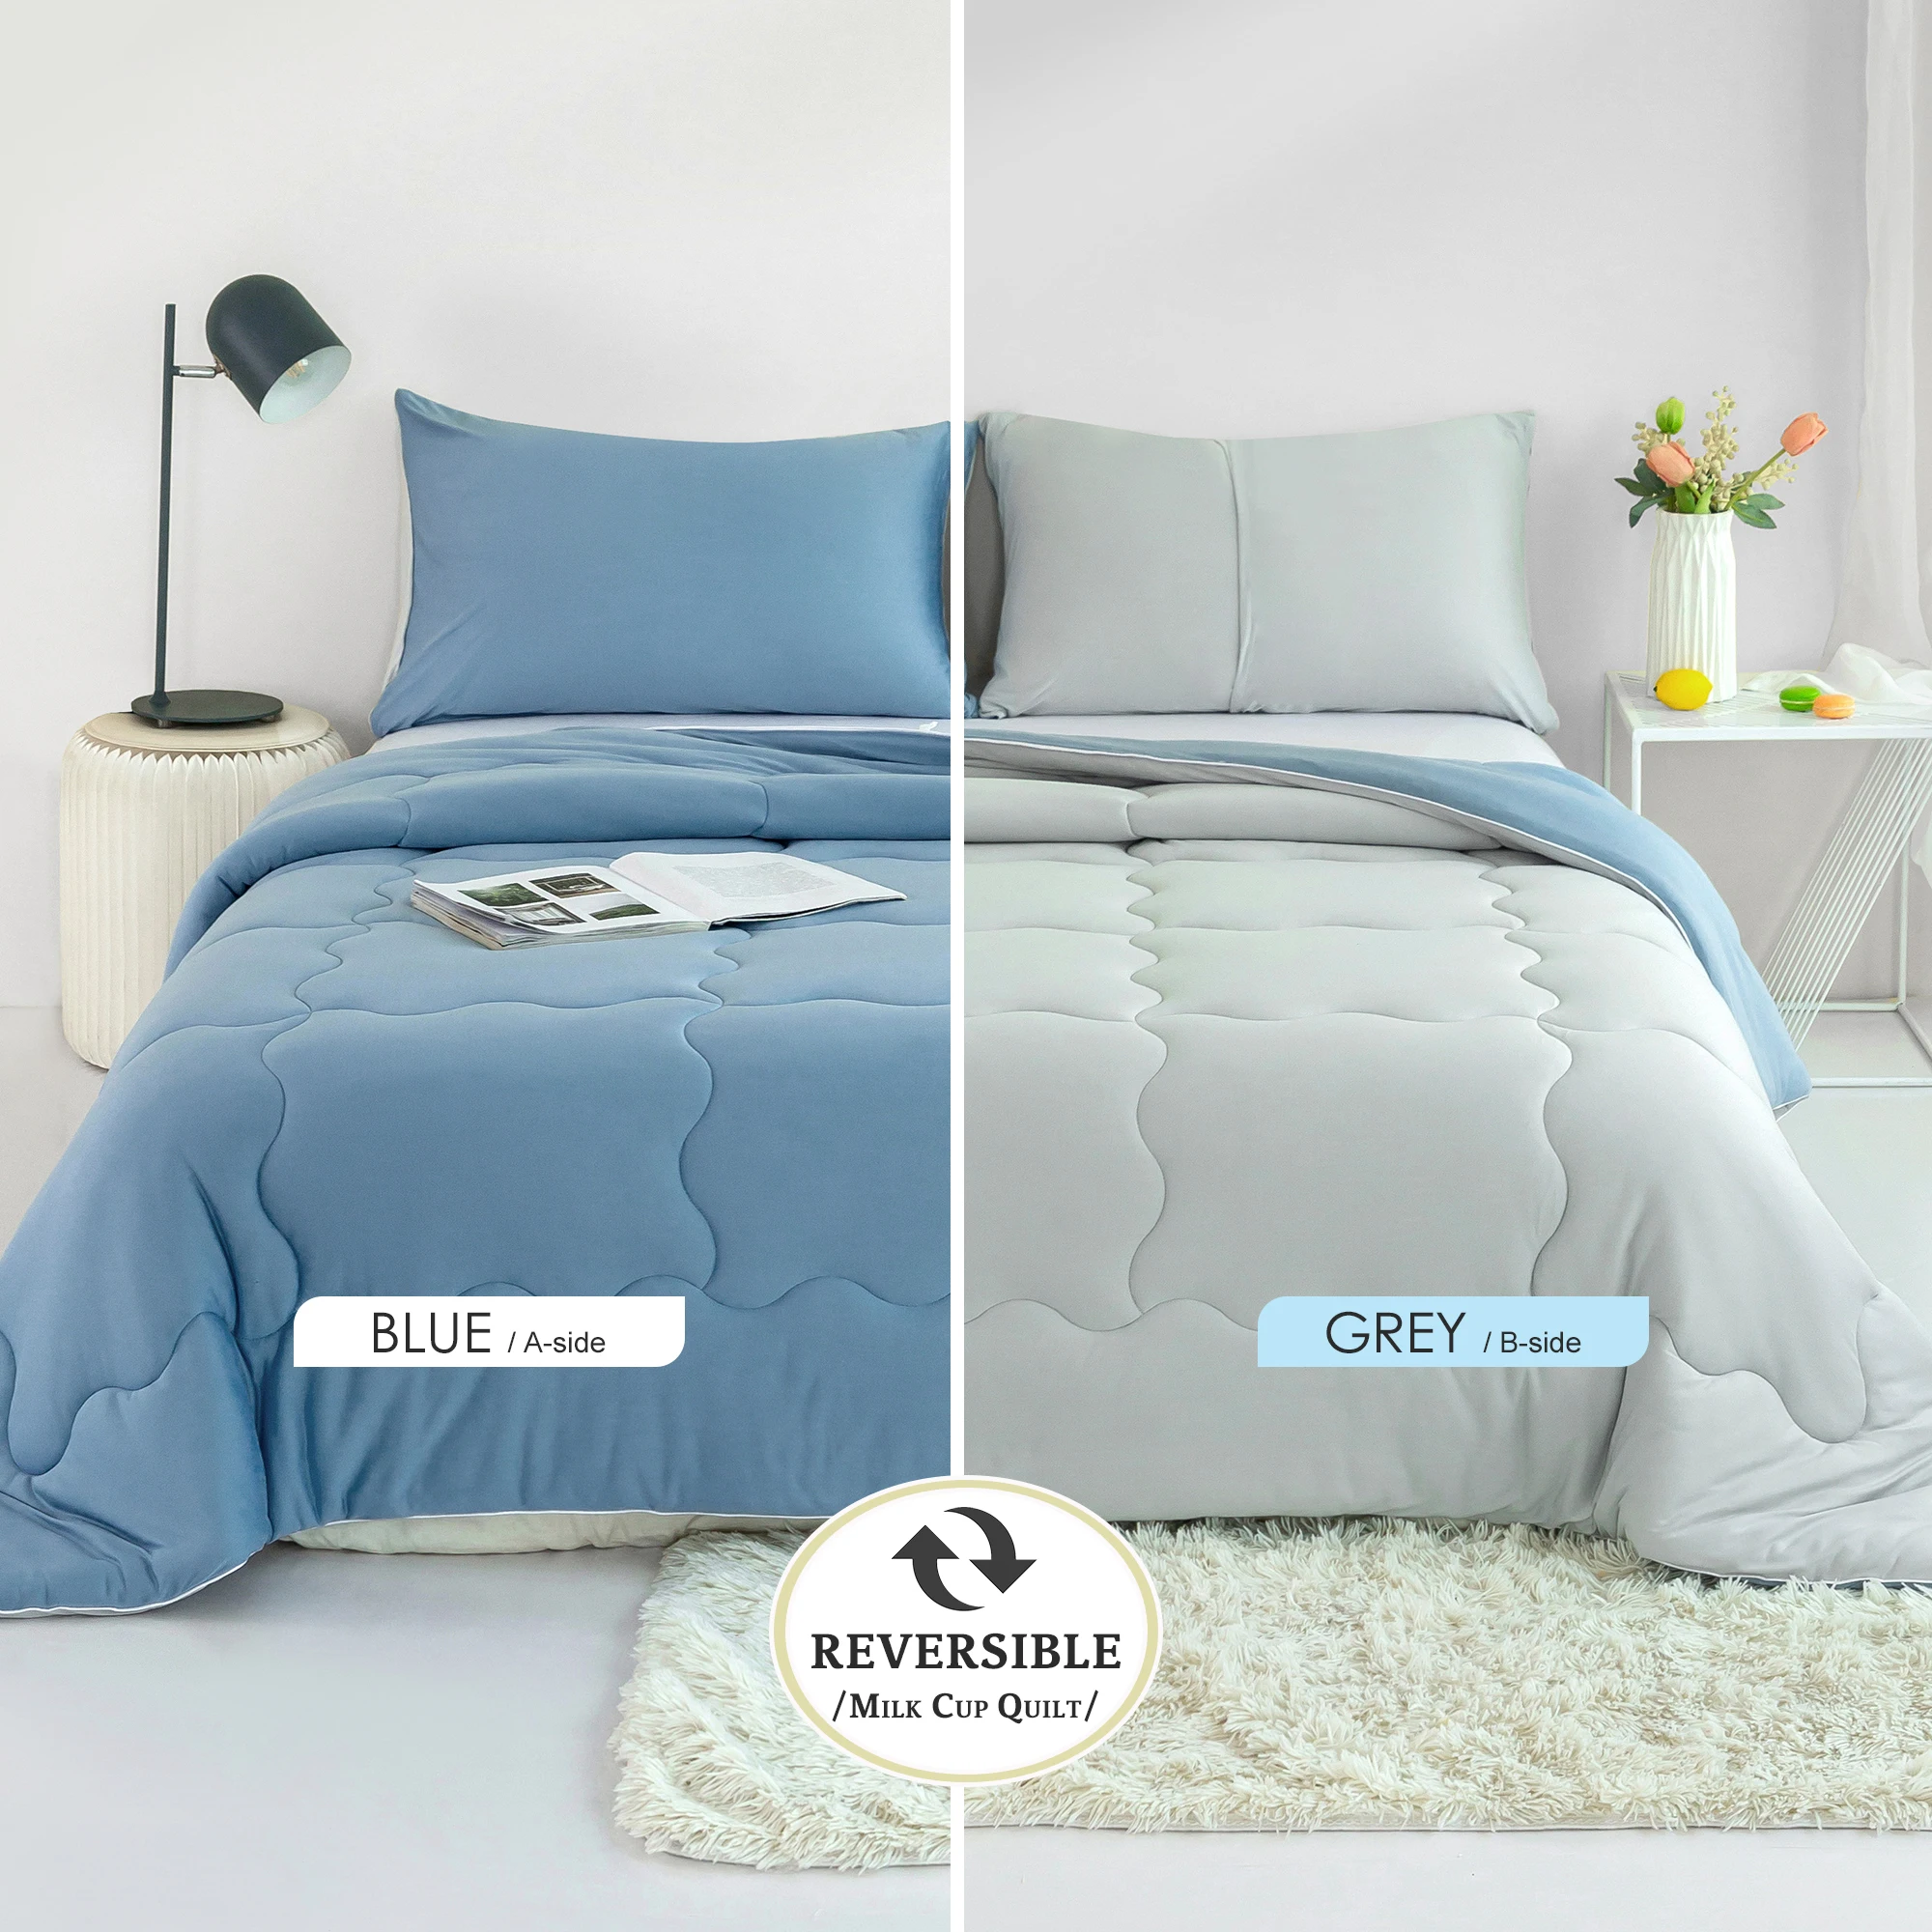 

light blue and grey, Cozy Fully Breathable Bedding comforter sets,The 271*234cm is 107inch*92 inch ,fitted forKing/Cal King Bed